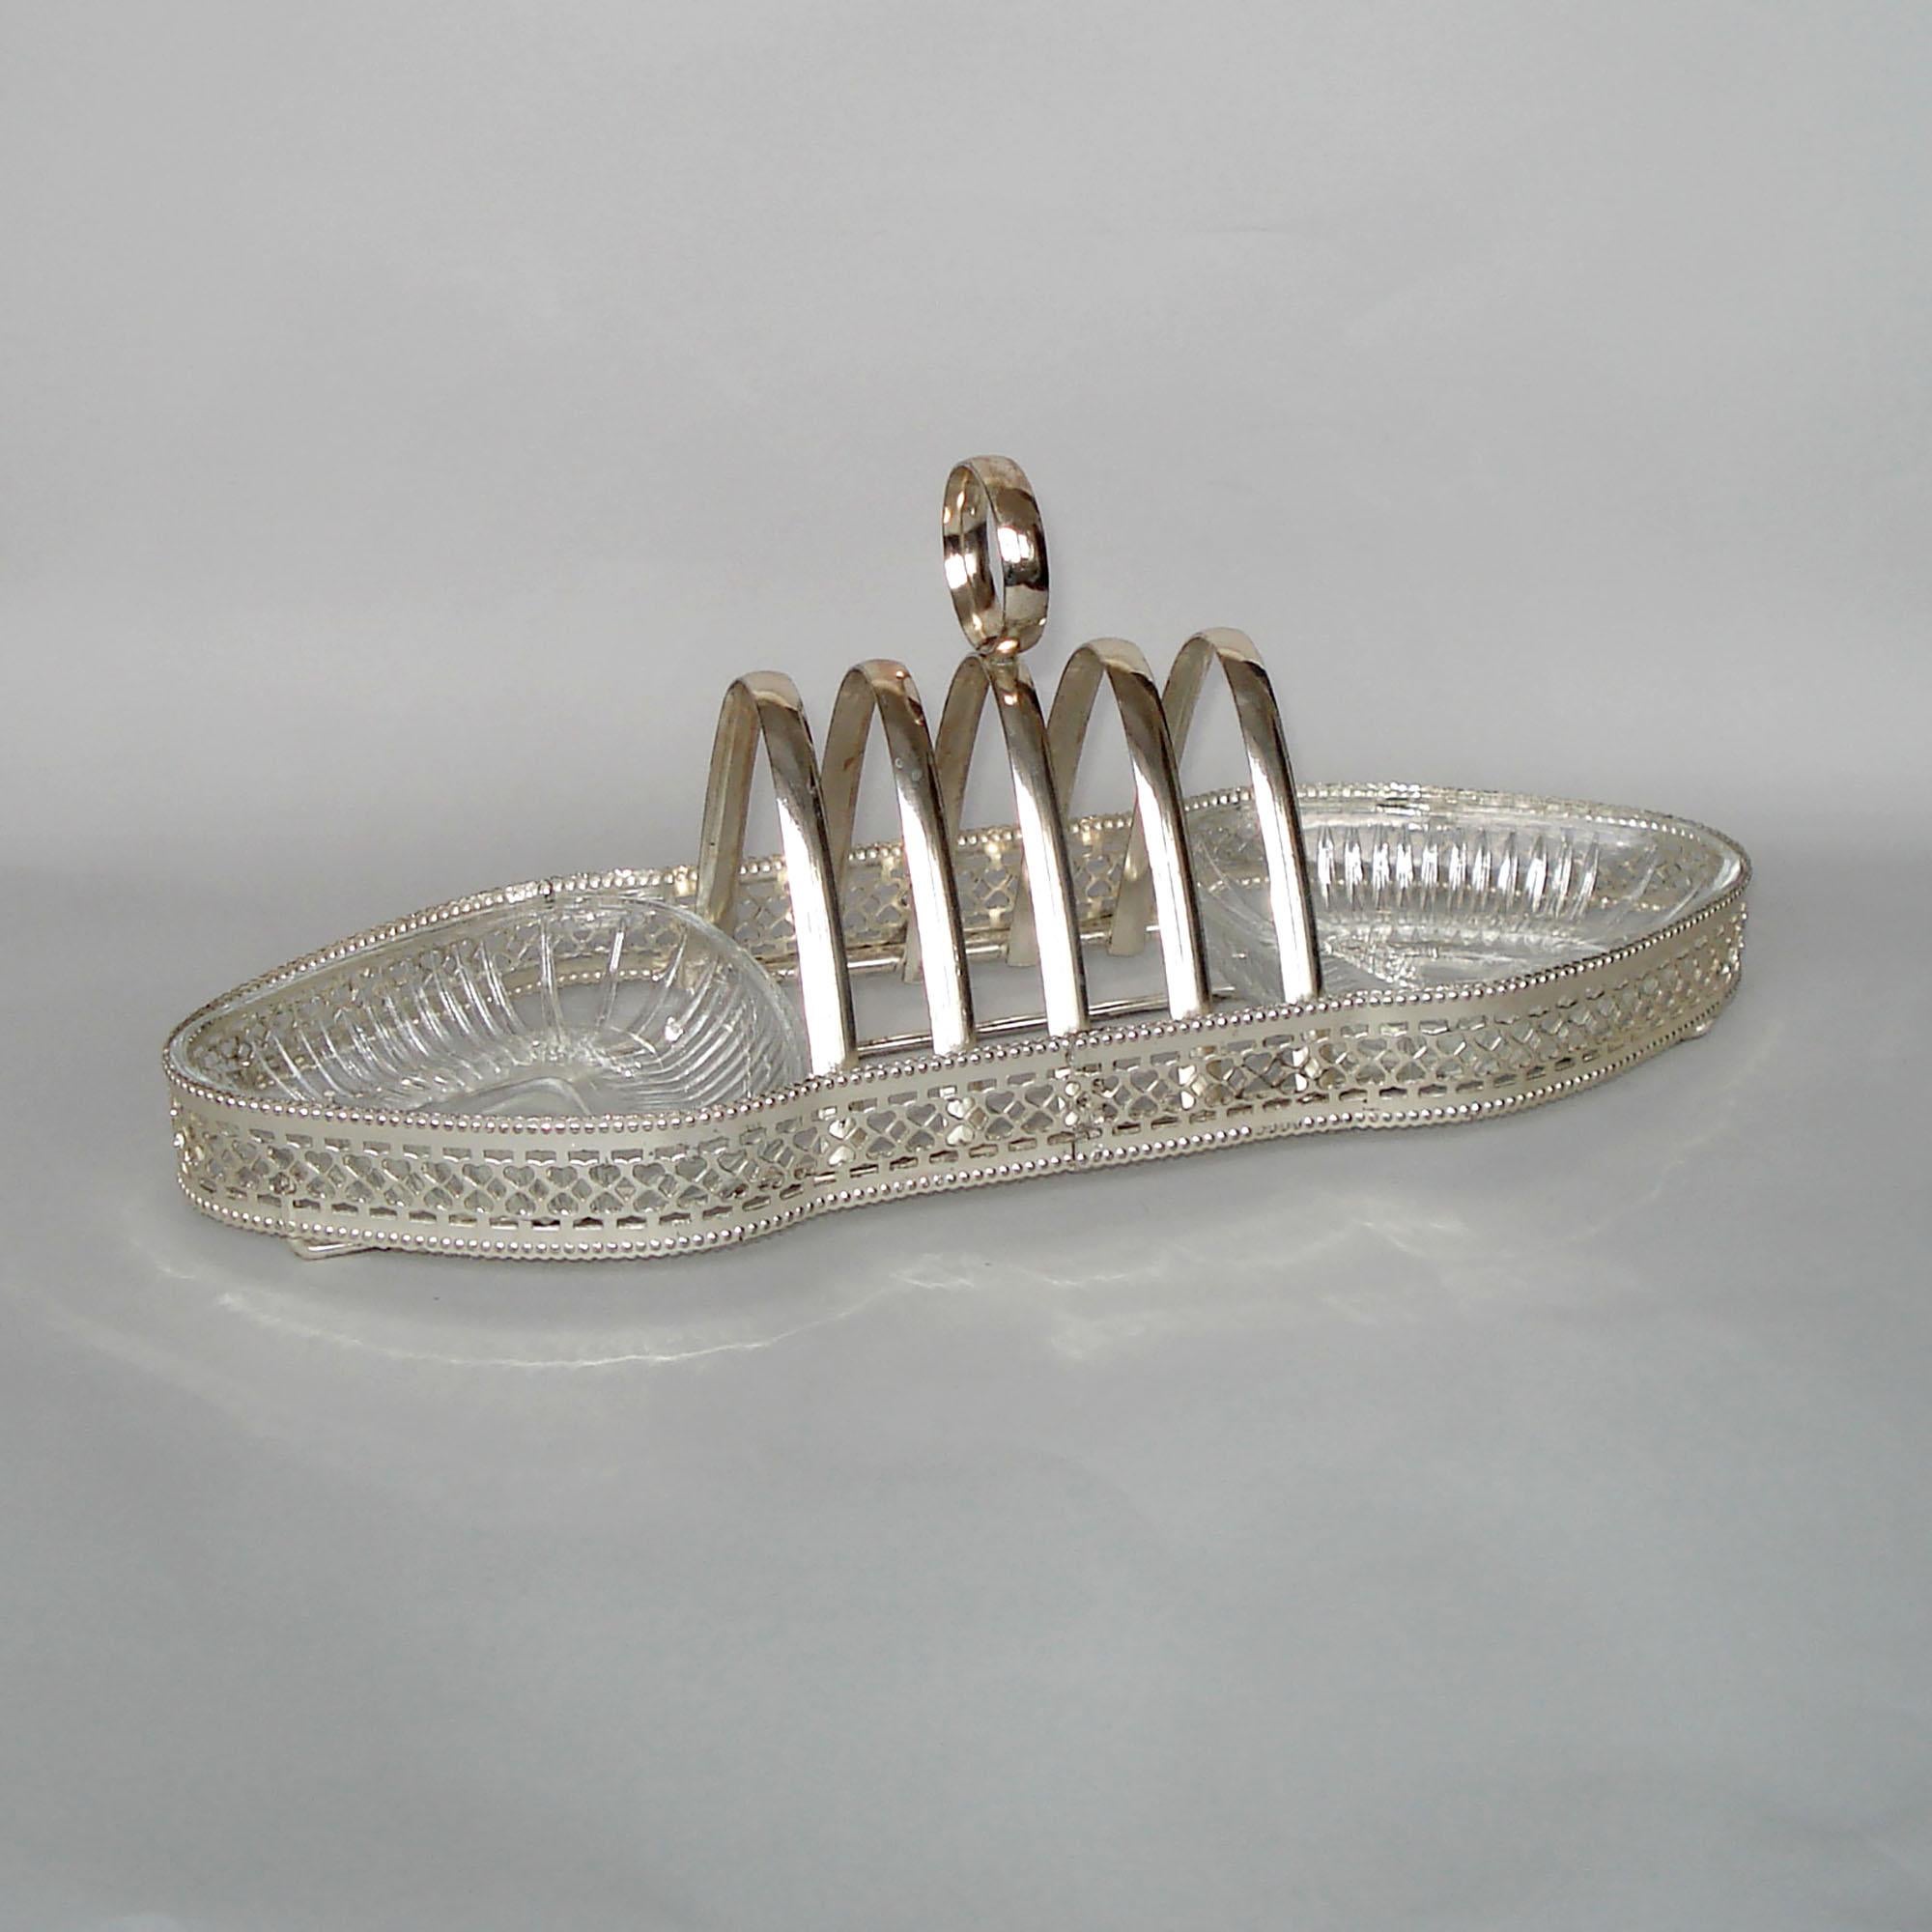 Vintage toast rack with side dishes for jam and butter, silvered metal and glass.
In very good condition, very light signs of use, some minor oxidation spots, glass dishes in perfect condition.
Dimensions: 29 x 11 x 11.5 cm.